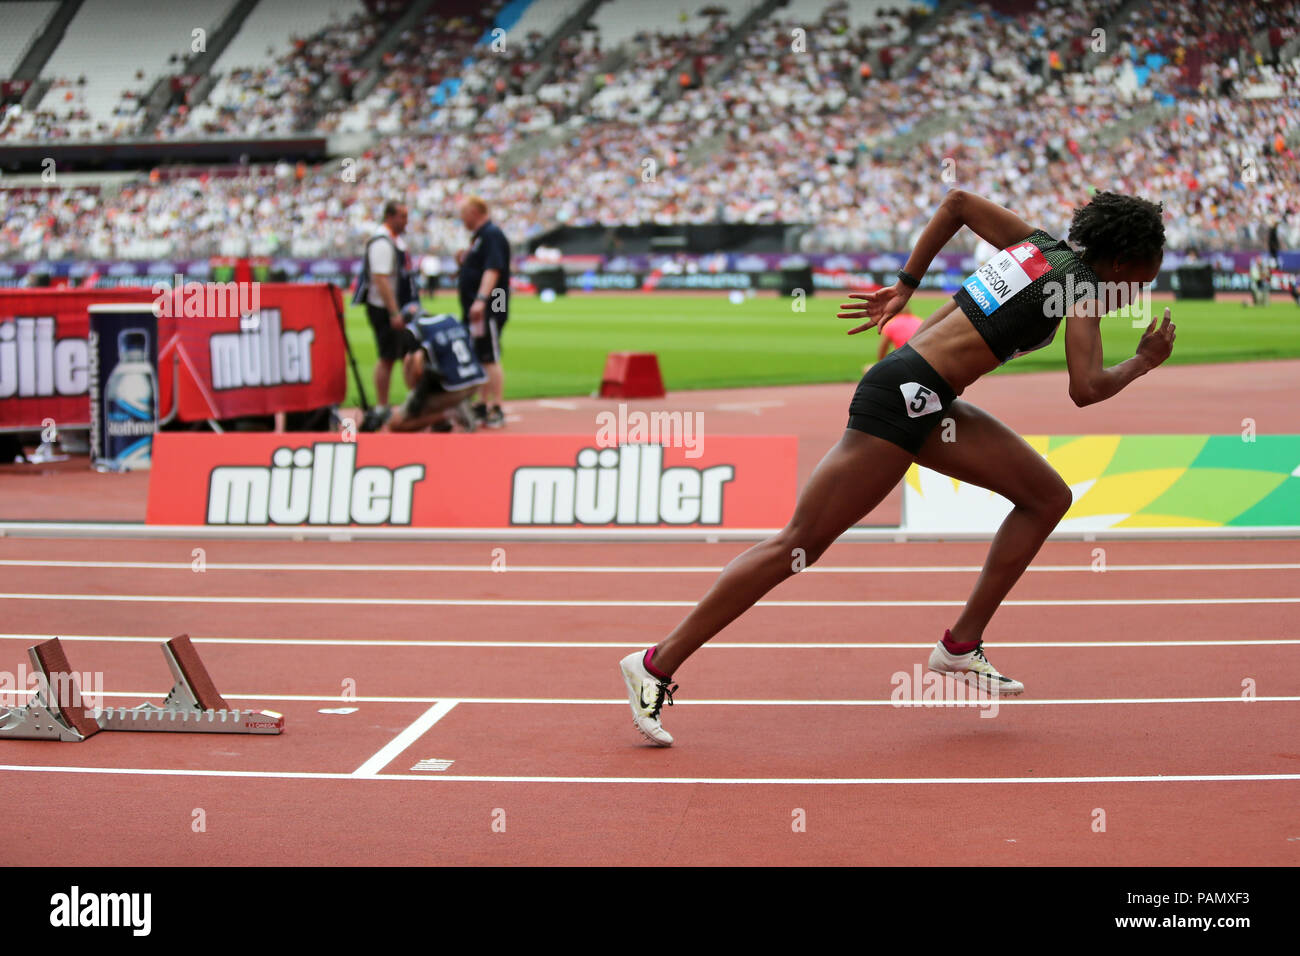 Stephenie Ann MCPHERSON (Jamaica) out of the starting blocks in the Women's 400m at the 2018, IAAF Diamond League, Olympic Park, Stratford, London, UK Stock Photo